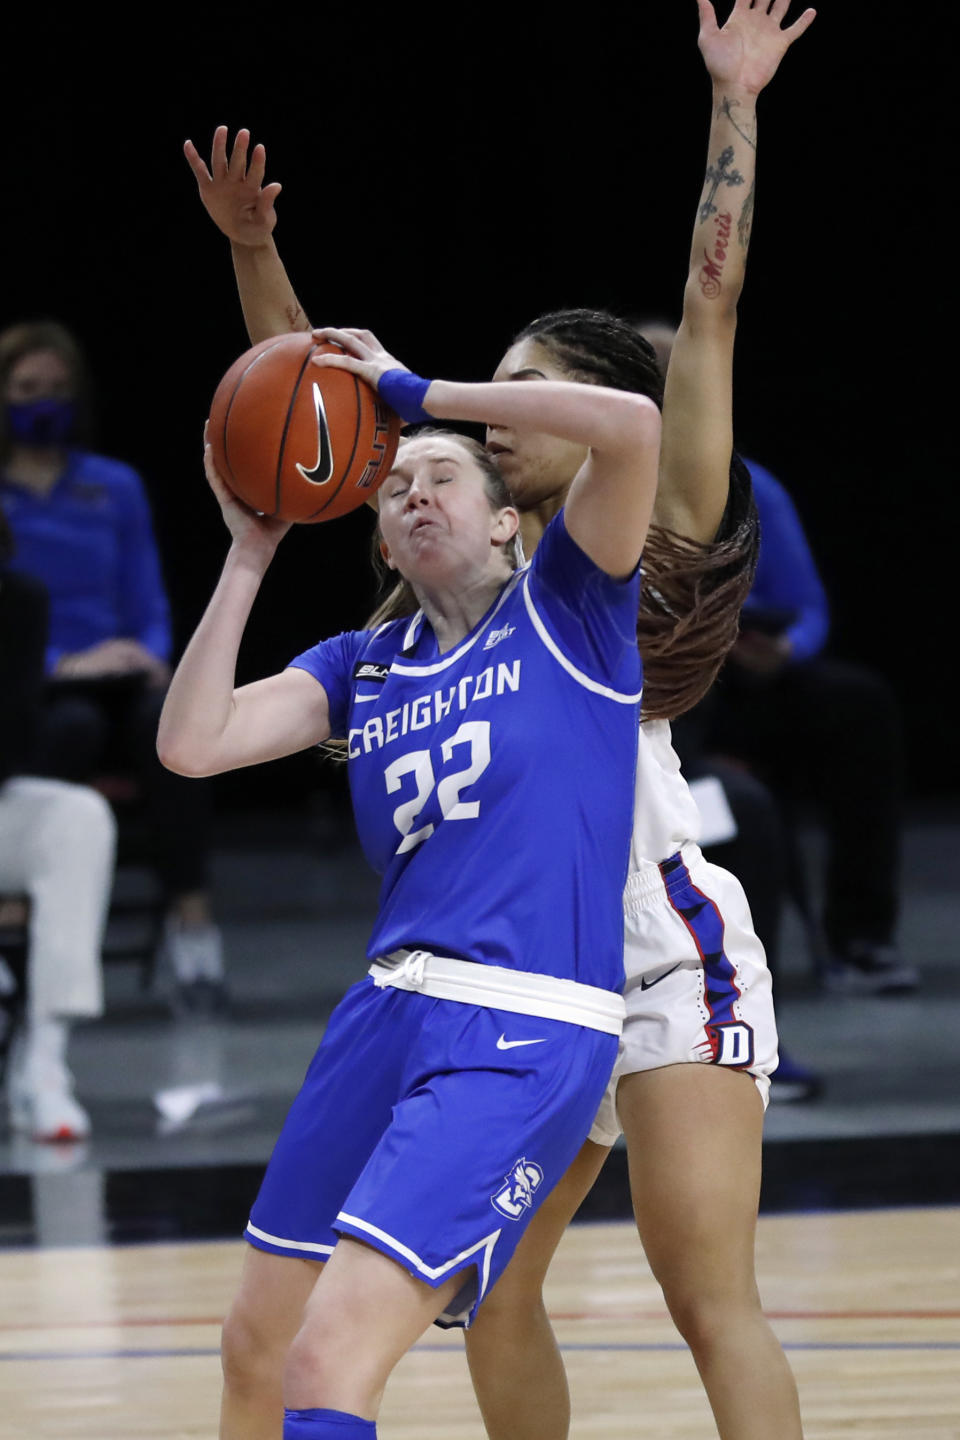 Creighton guard Carly Bachelor (22) is pressured by DePaul guard Sonya Morris during the first half of an NCAA college basketball game Saturday, Feb. 20, 2021, in Chicago. (AP Photo/Shafkat Anowar)